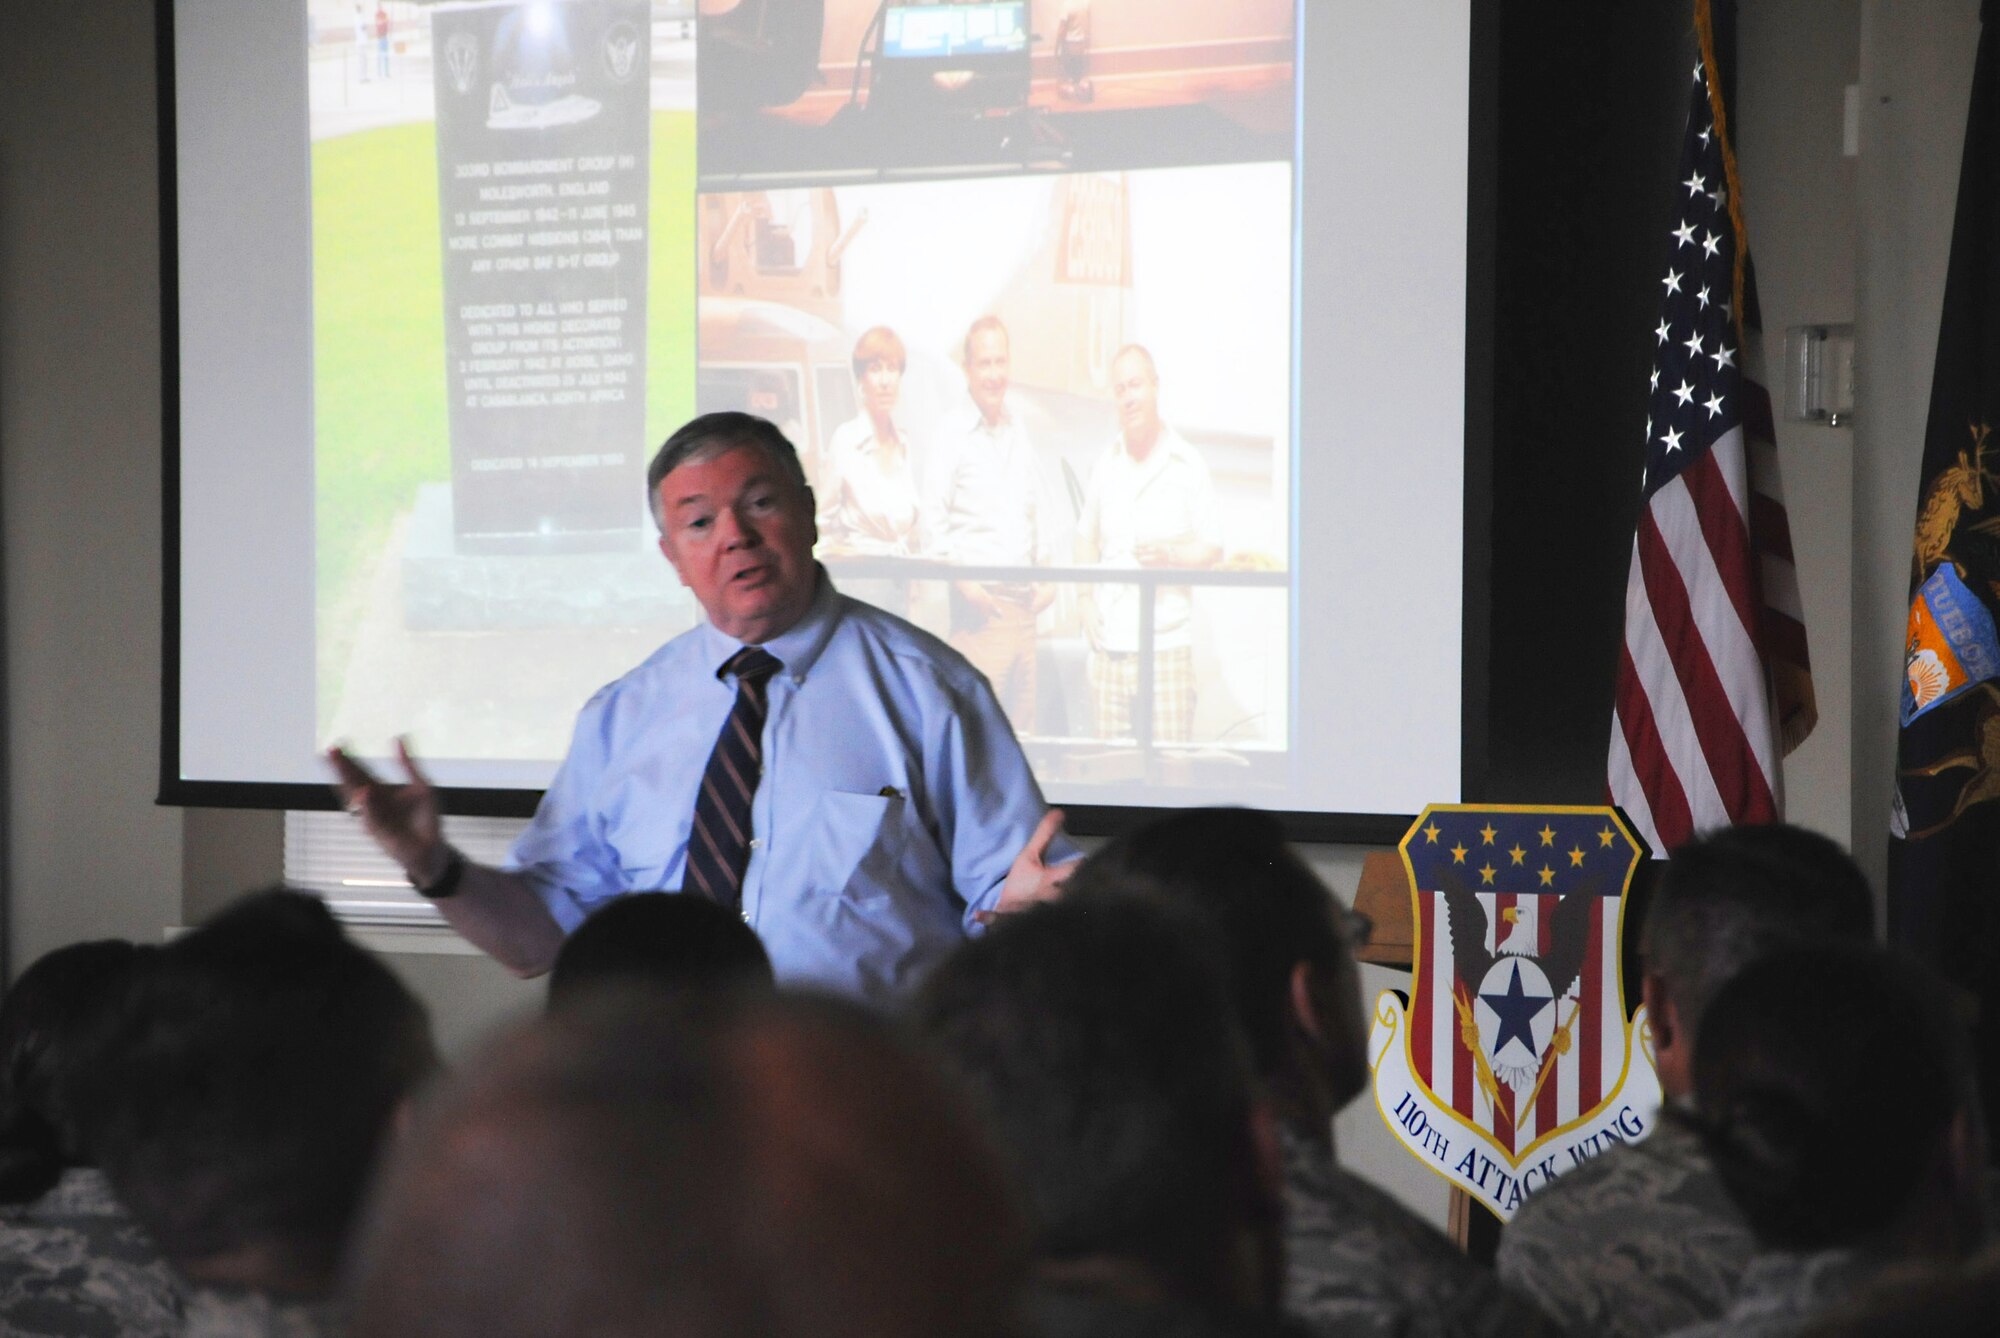 Service members from the 110th Attack Wing Battle Creek Air National Guard Base, Mich., gather for a distinguished presentation featuring Mr. James G. Clark, Director, Intelligence, Surveillance and Reconnaissance Innovation, Deputy Chief of Staff for ISR, Headquarters U.S. Air Force, Washington, D.C., Wednesday, August 17, 2016, Battle Creek, Mich. Mr. Clark reflected briefly on his service as a pilot in the U.S. Air Force, from which he retired in 2001 with the rank of Col., as well as his road to becoming a key innovator in RPA operations.(U.S. Air National Guard Photo by Master Sgt. Sonia Pawloski/released)